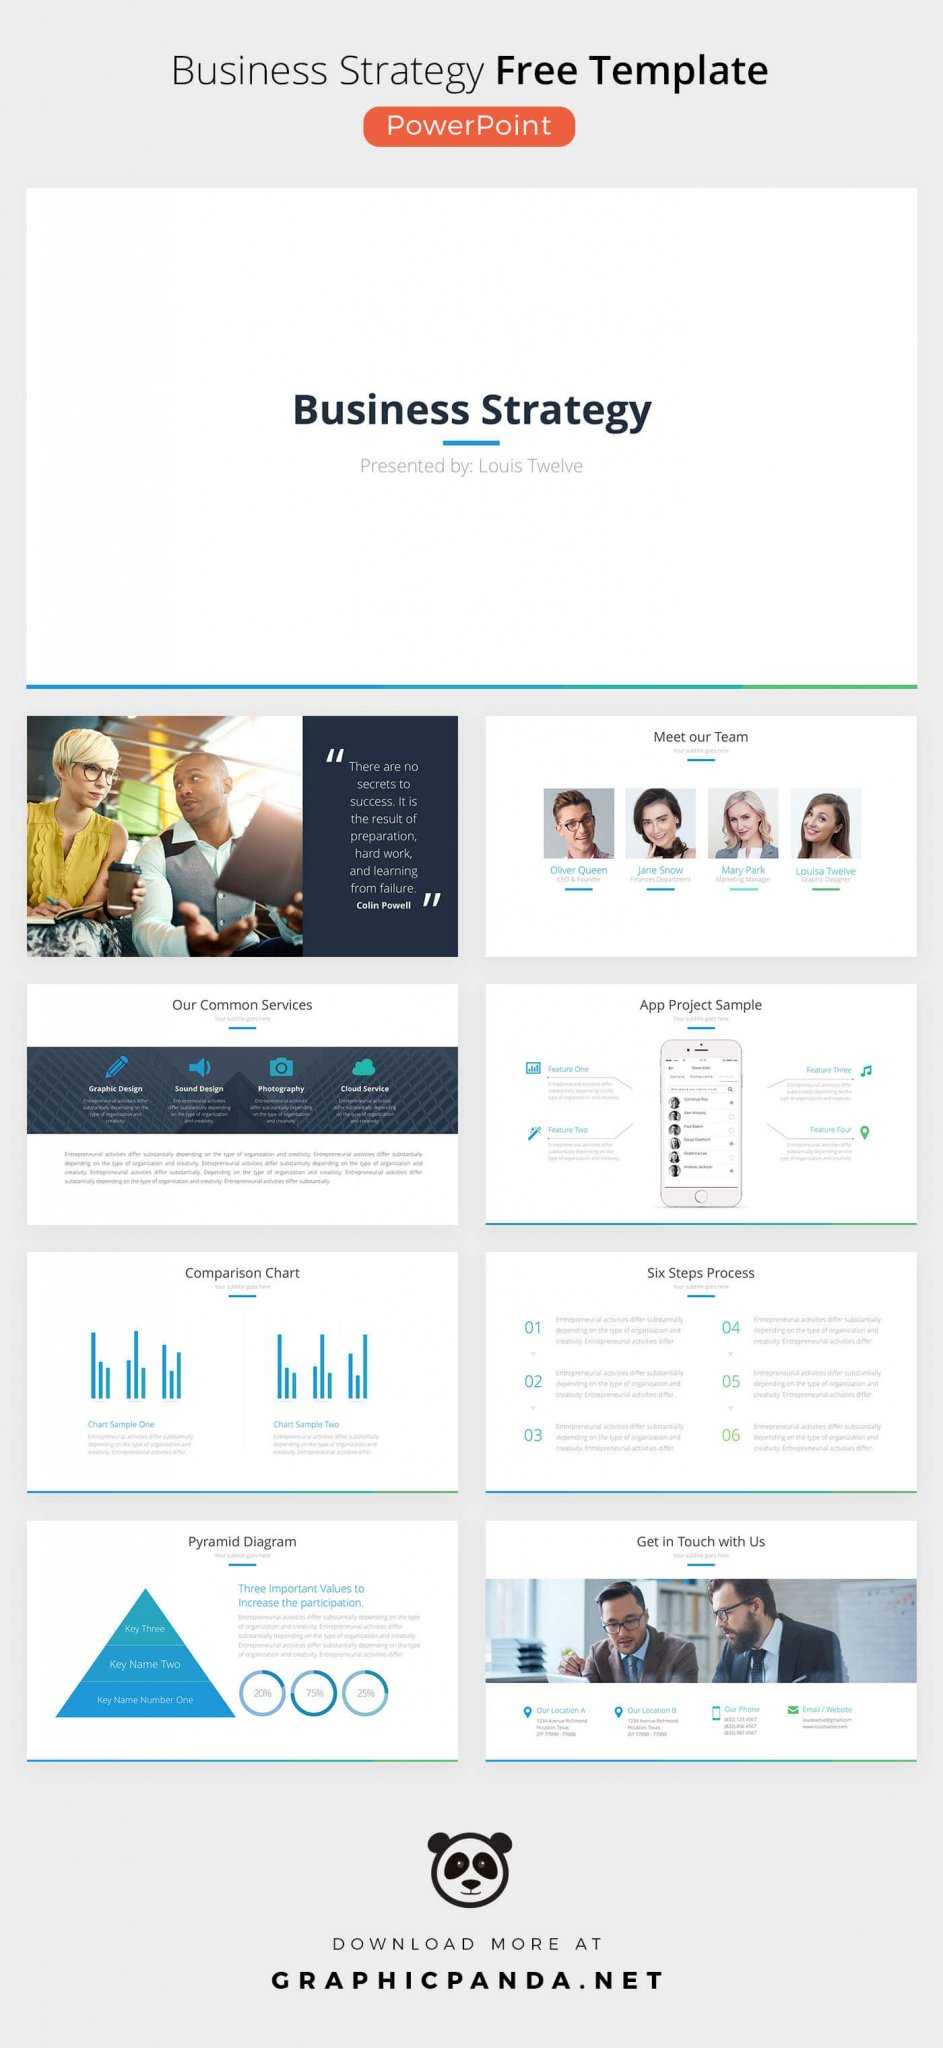 Business Strategy Free Powerpoint Template Ppt / Pptx With Regard To Biography Powerpoint Template